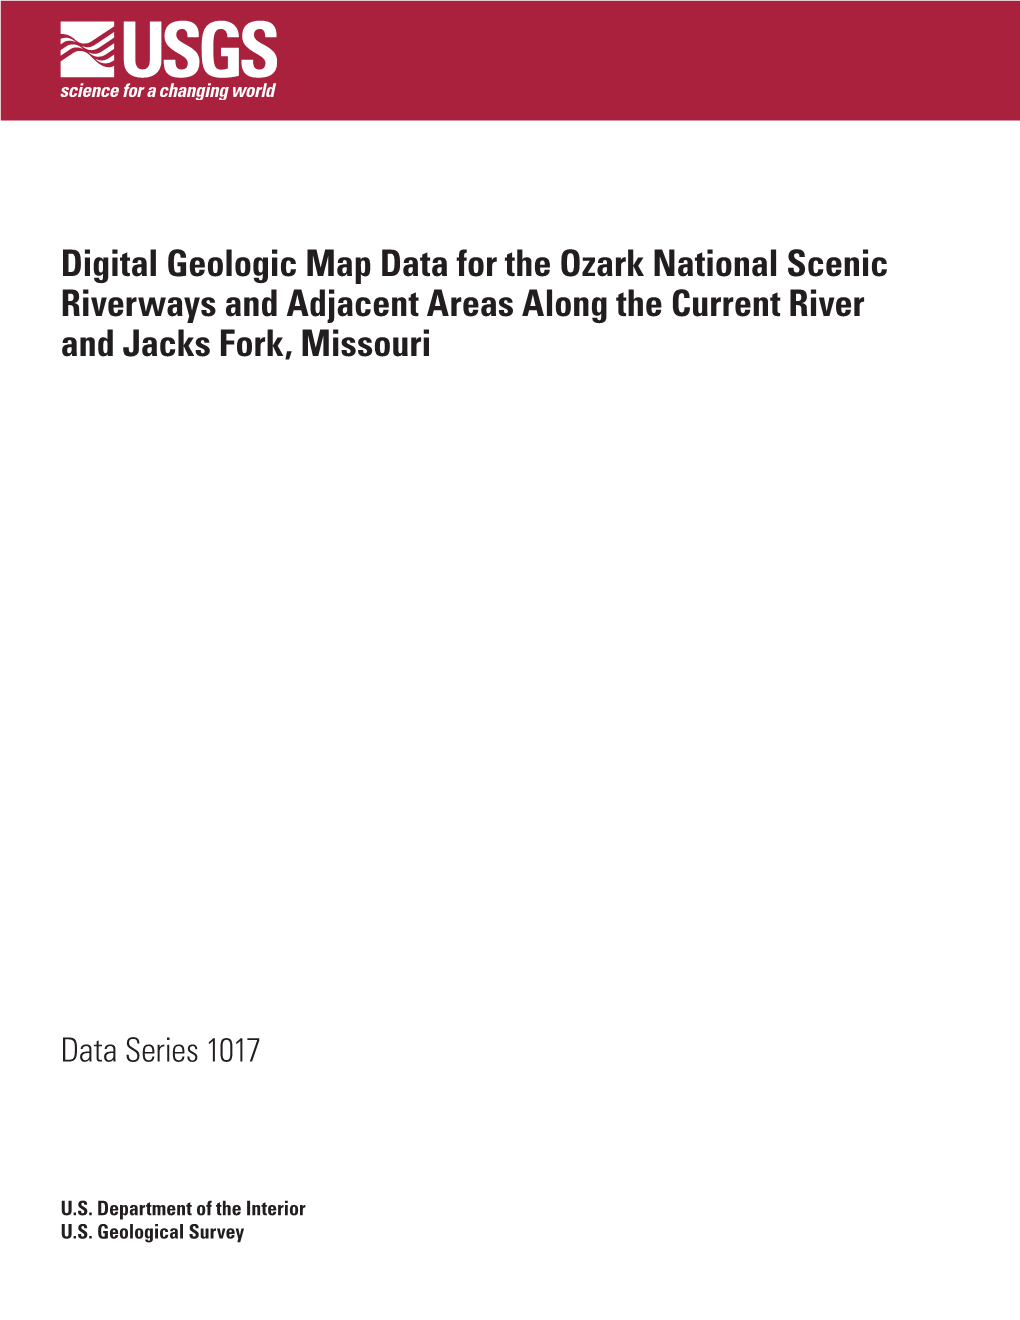 Digital Geologic Map Data for the Ozark National Scenic Riverways and Adjacent Areas Along the Current River and Jacks Fork, Missouri